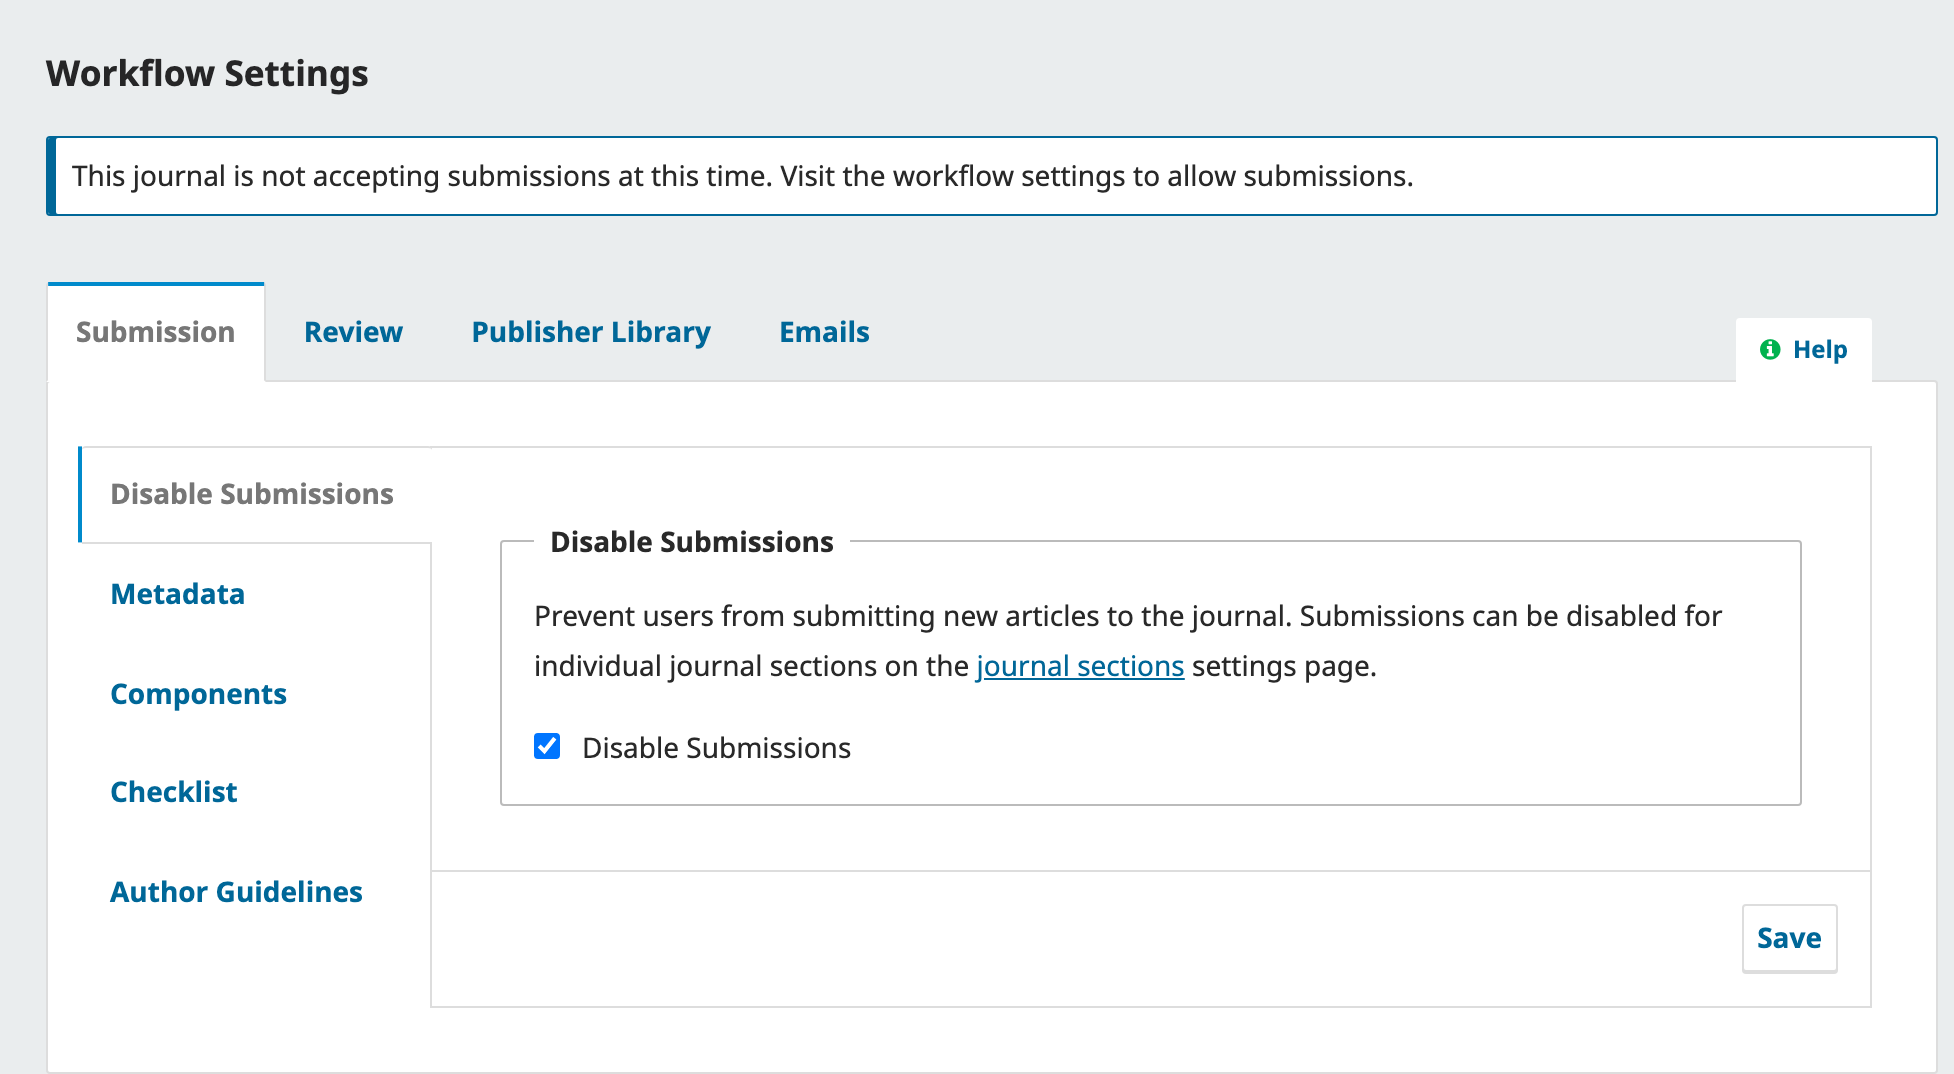 OJS 3.3 notice about the journal not accepting submissions.